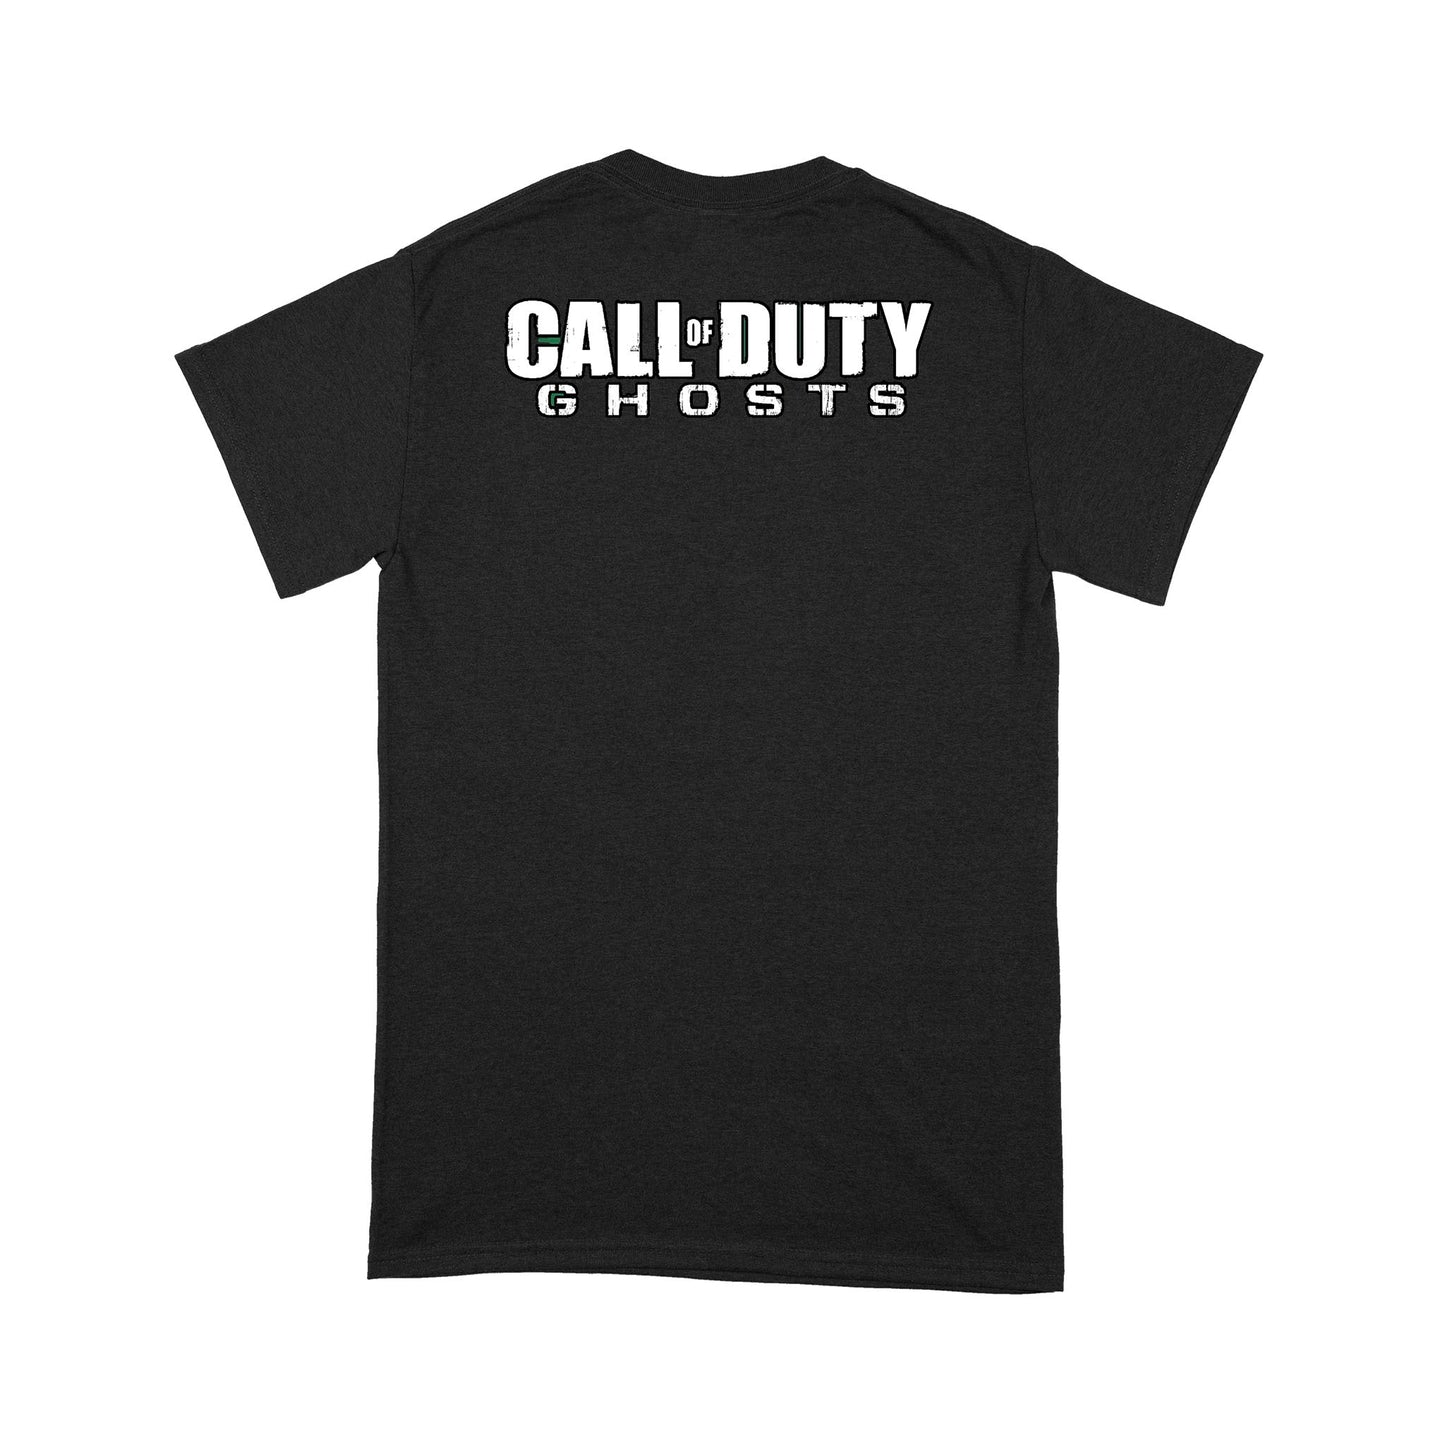 Call_of_Duty_Ghosts - Standard T-Shirt Gapo Goods